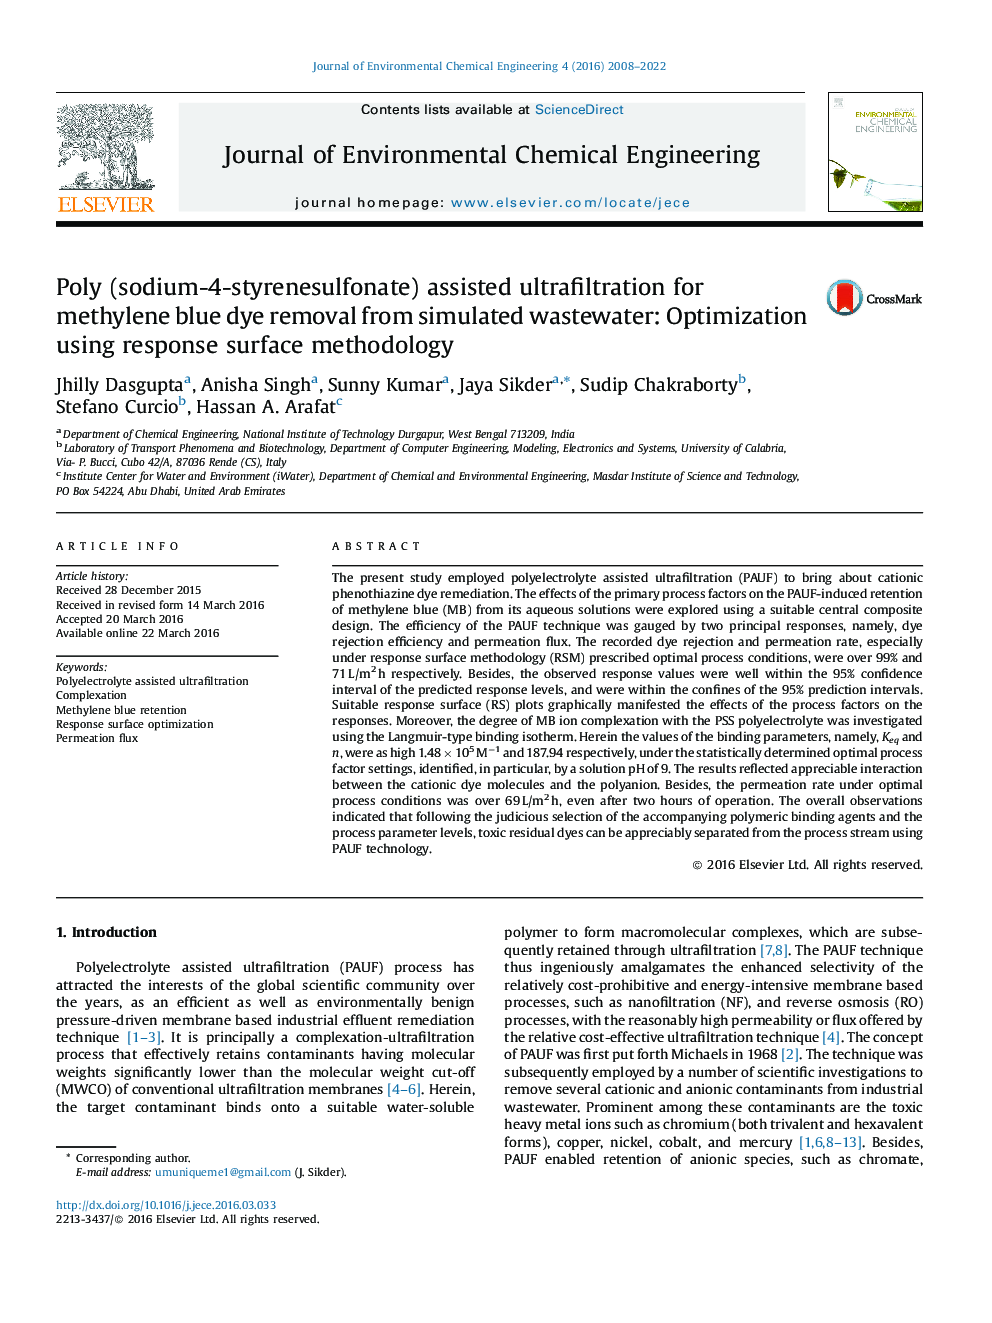 Poly (sodium-4-styrenesulfonate) assisted ultrafiltration for methylene blue dye removal from simulated wastewater: Optimization using response surface methodology